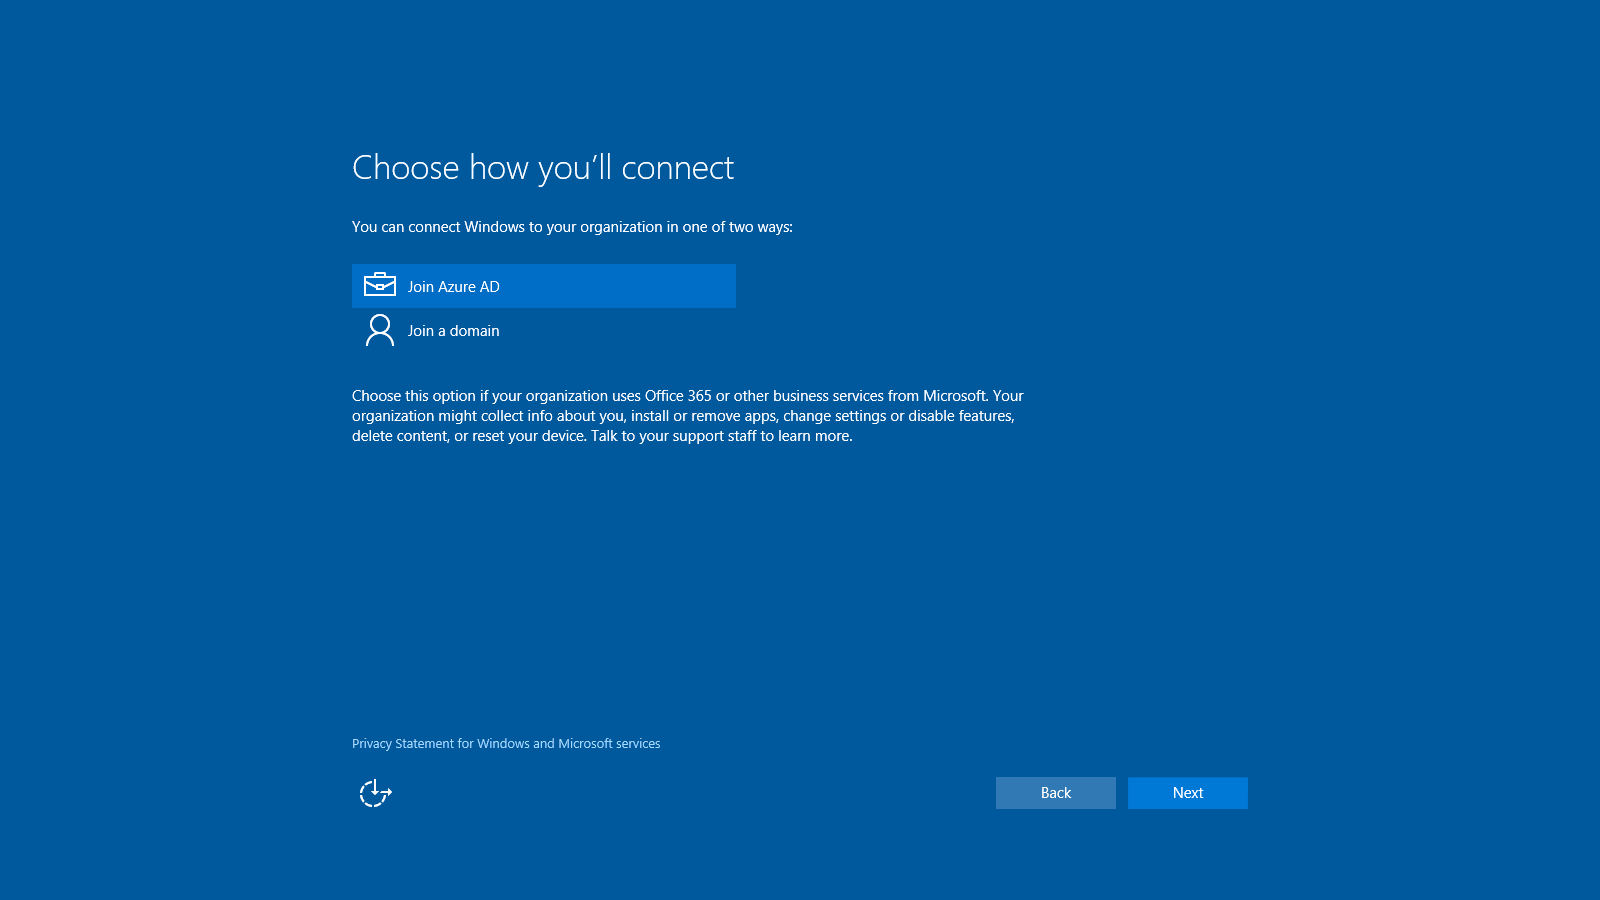 A screenshot of the 'Choose how you'll connect' page in Windows 10 setup.